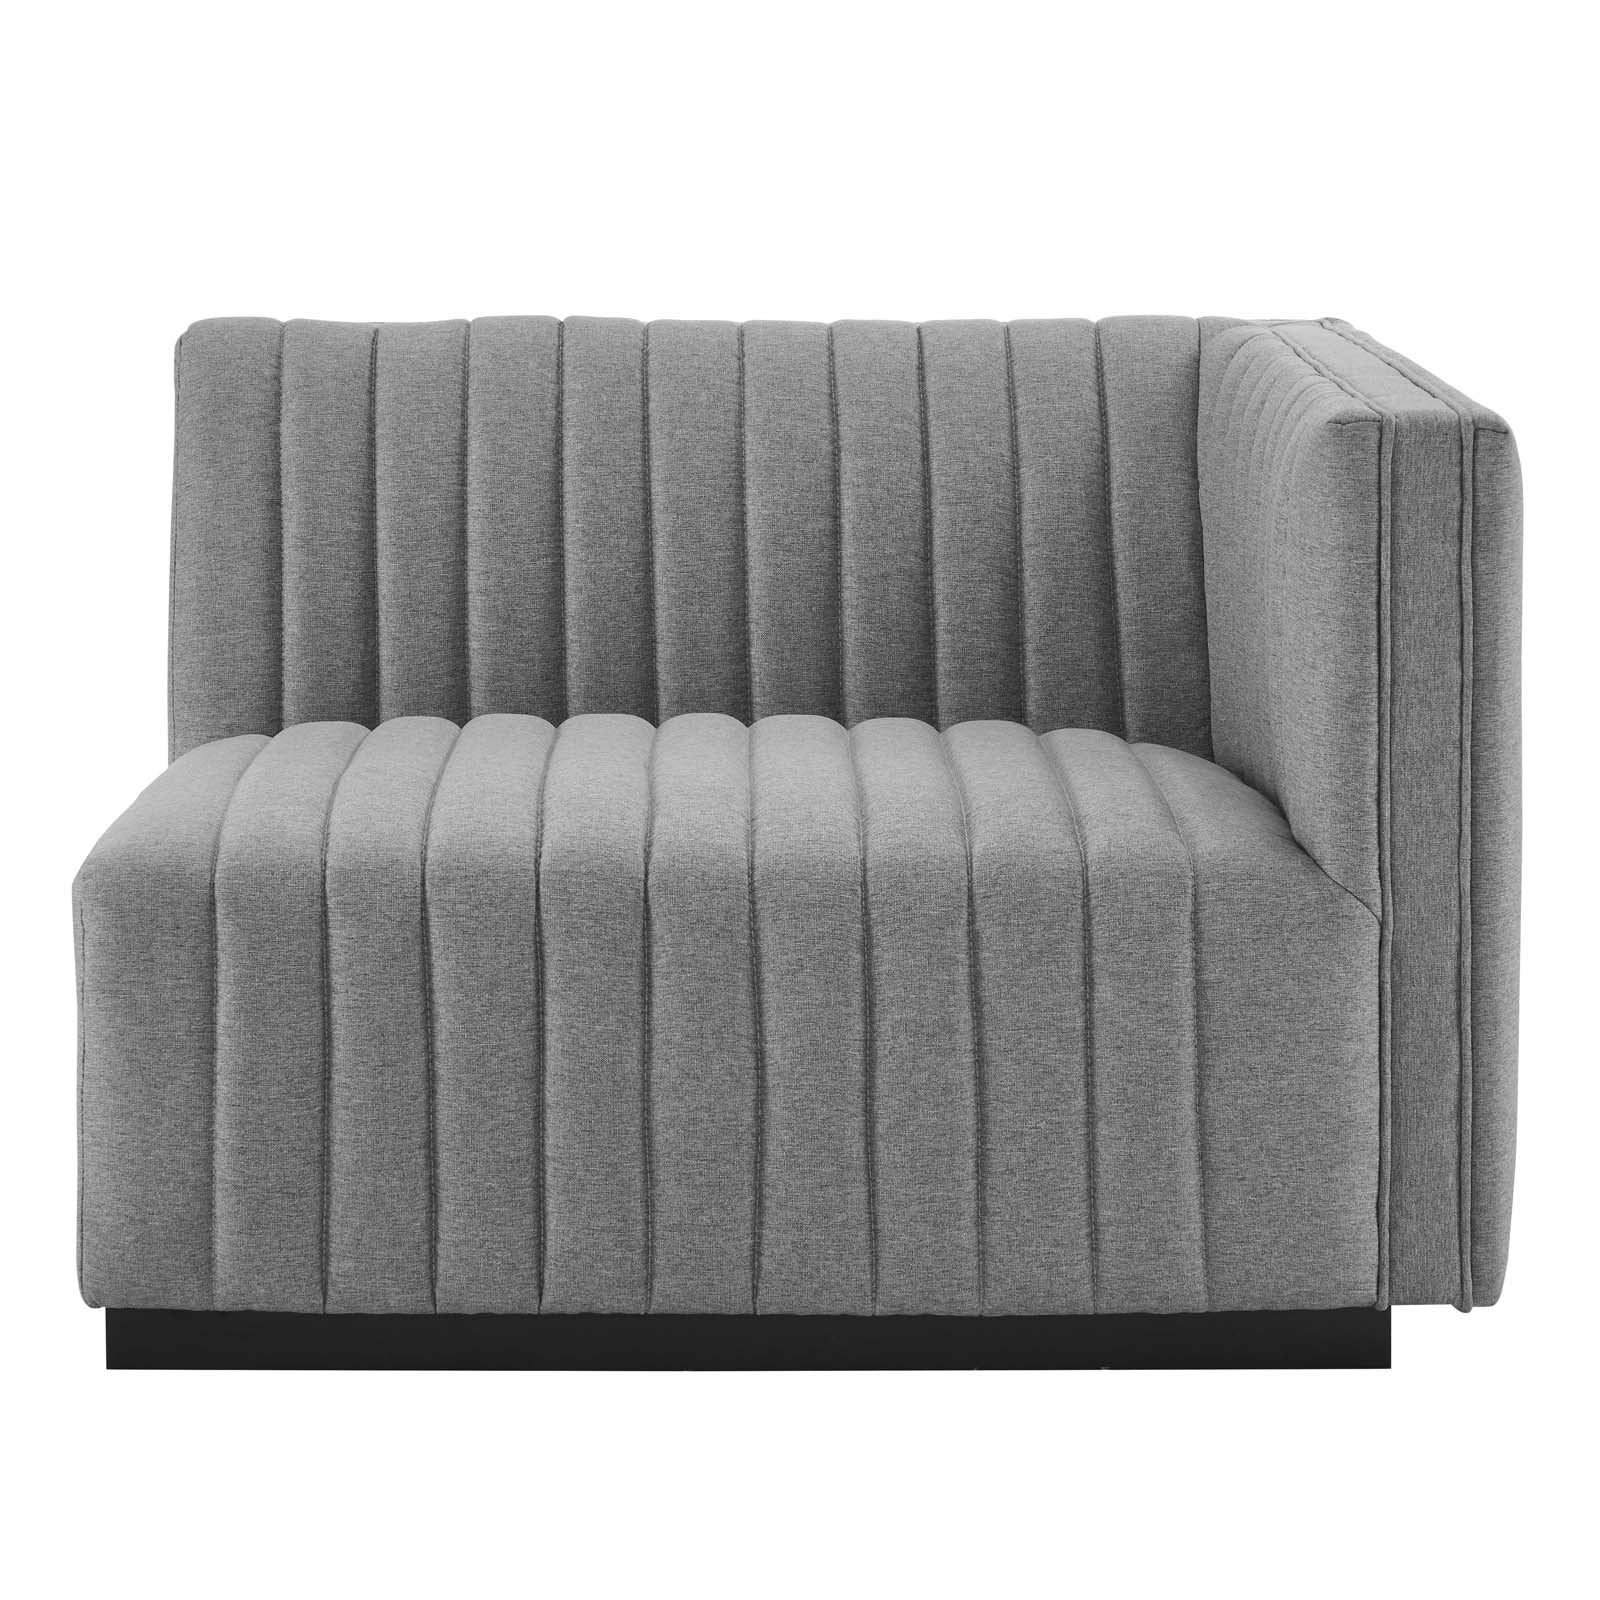 Modway Sectional Sofas - Conjure Channel Tufted Upholstered Fabric 4-Piece L-Shaped Sectional Black Light Gray